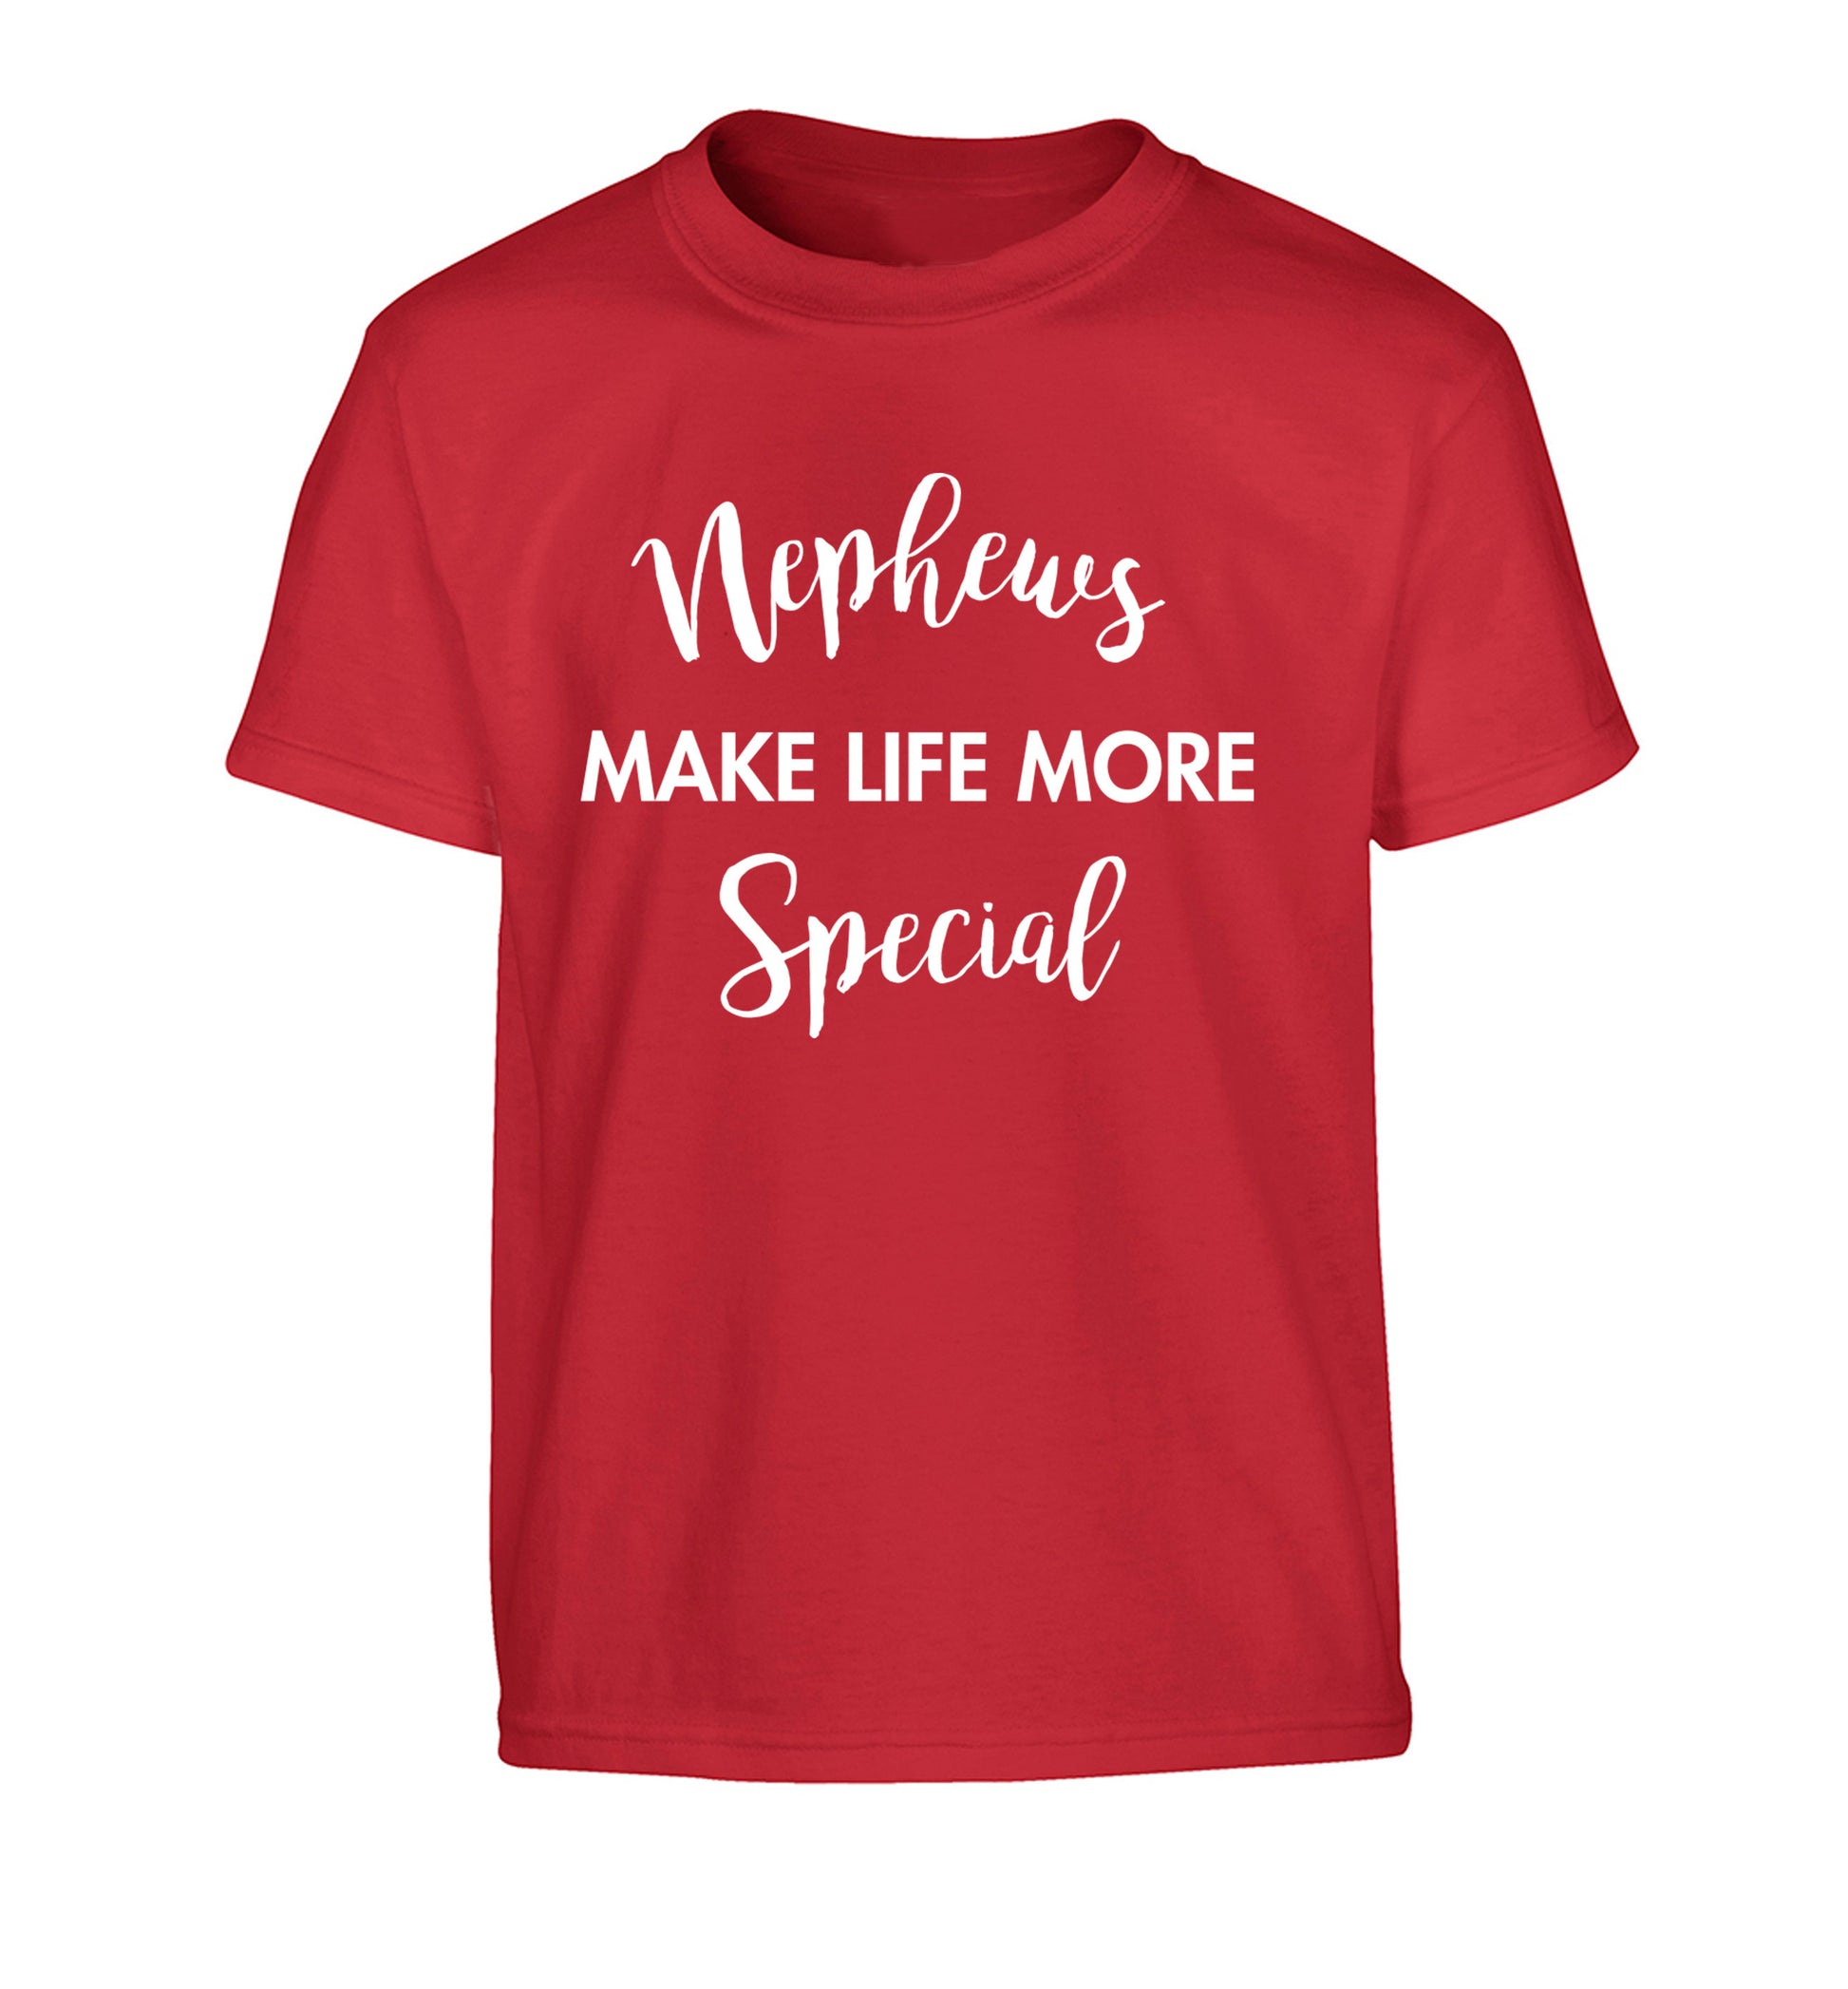 Nephews make life more special Children's red Tshirt 12-14 Years